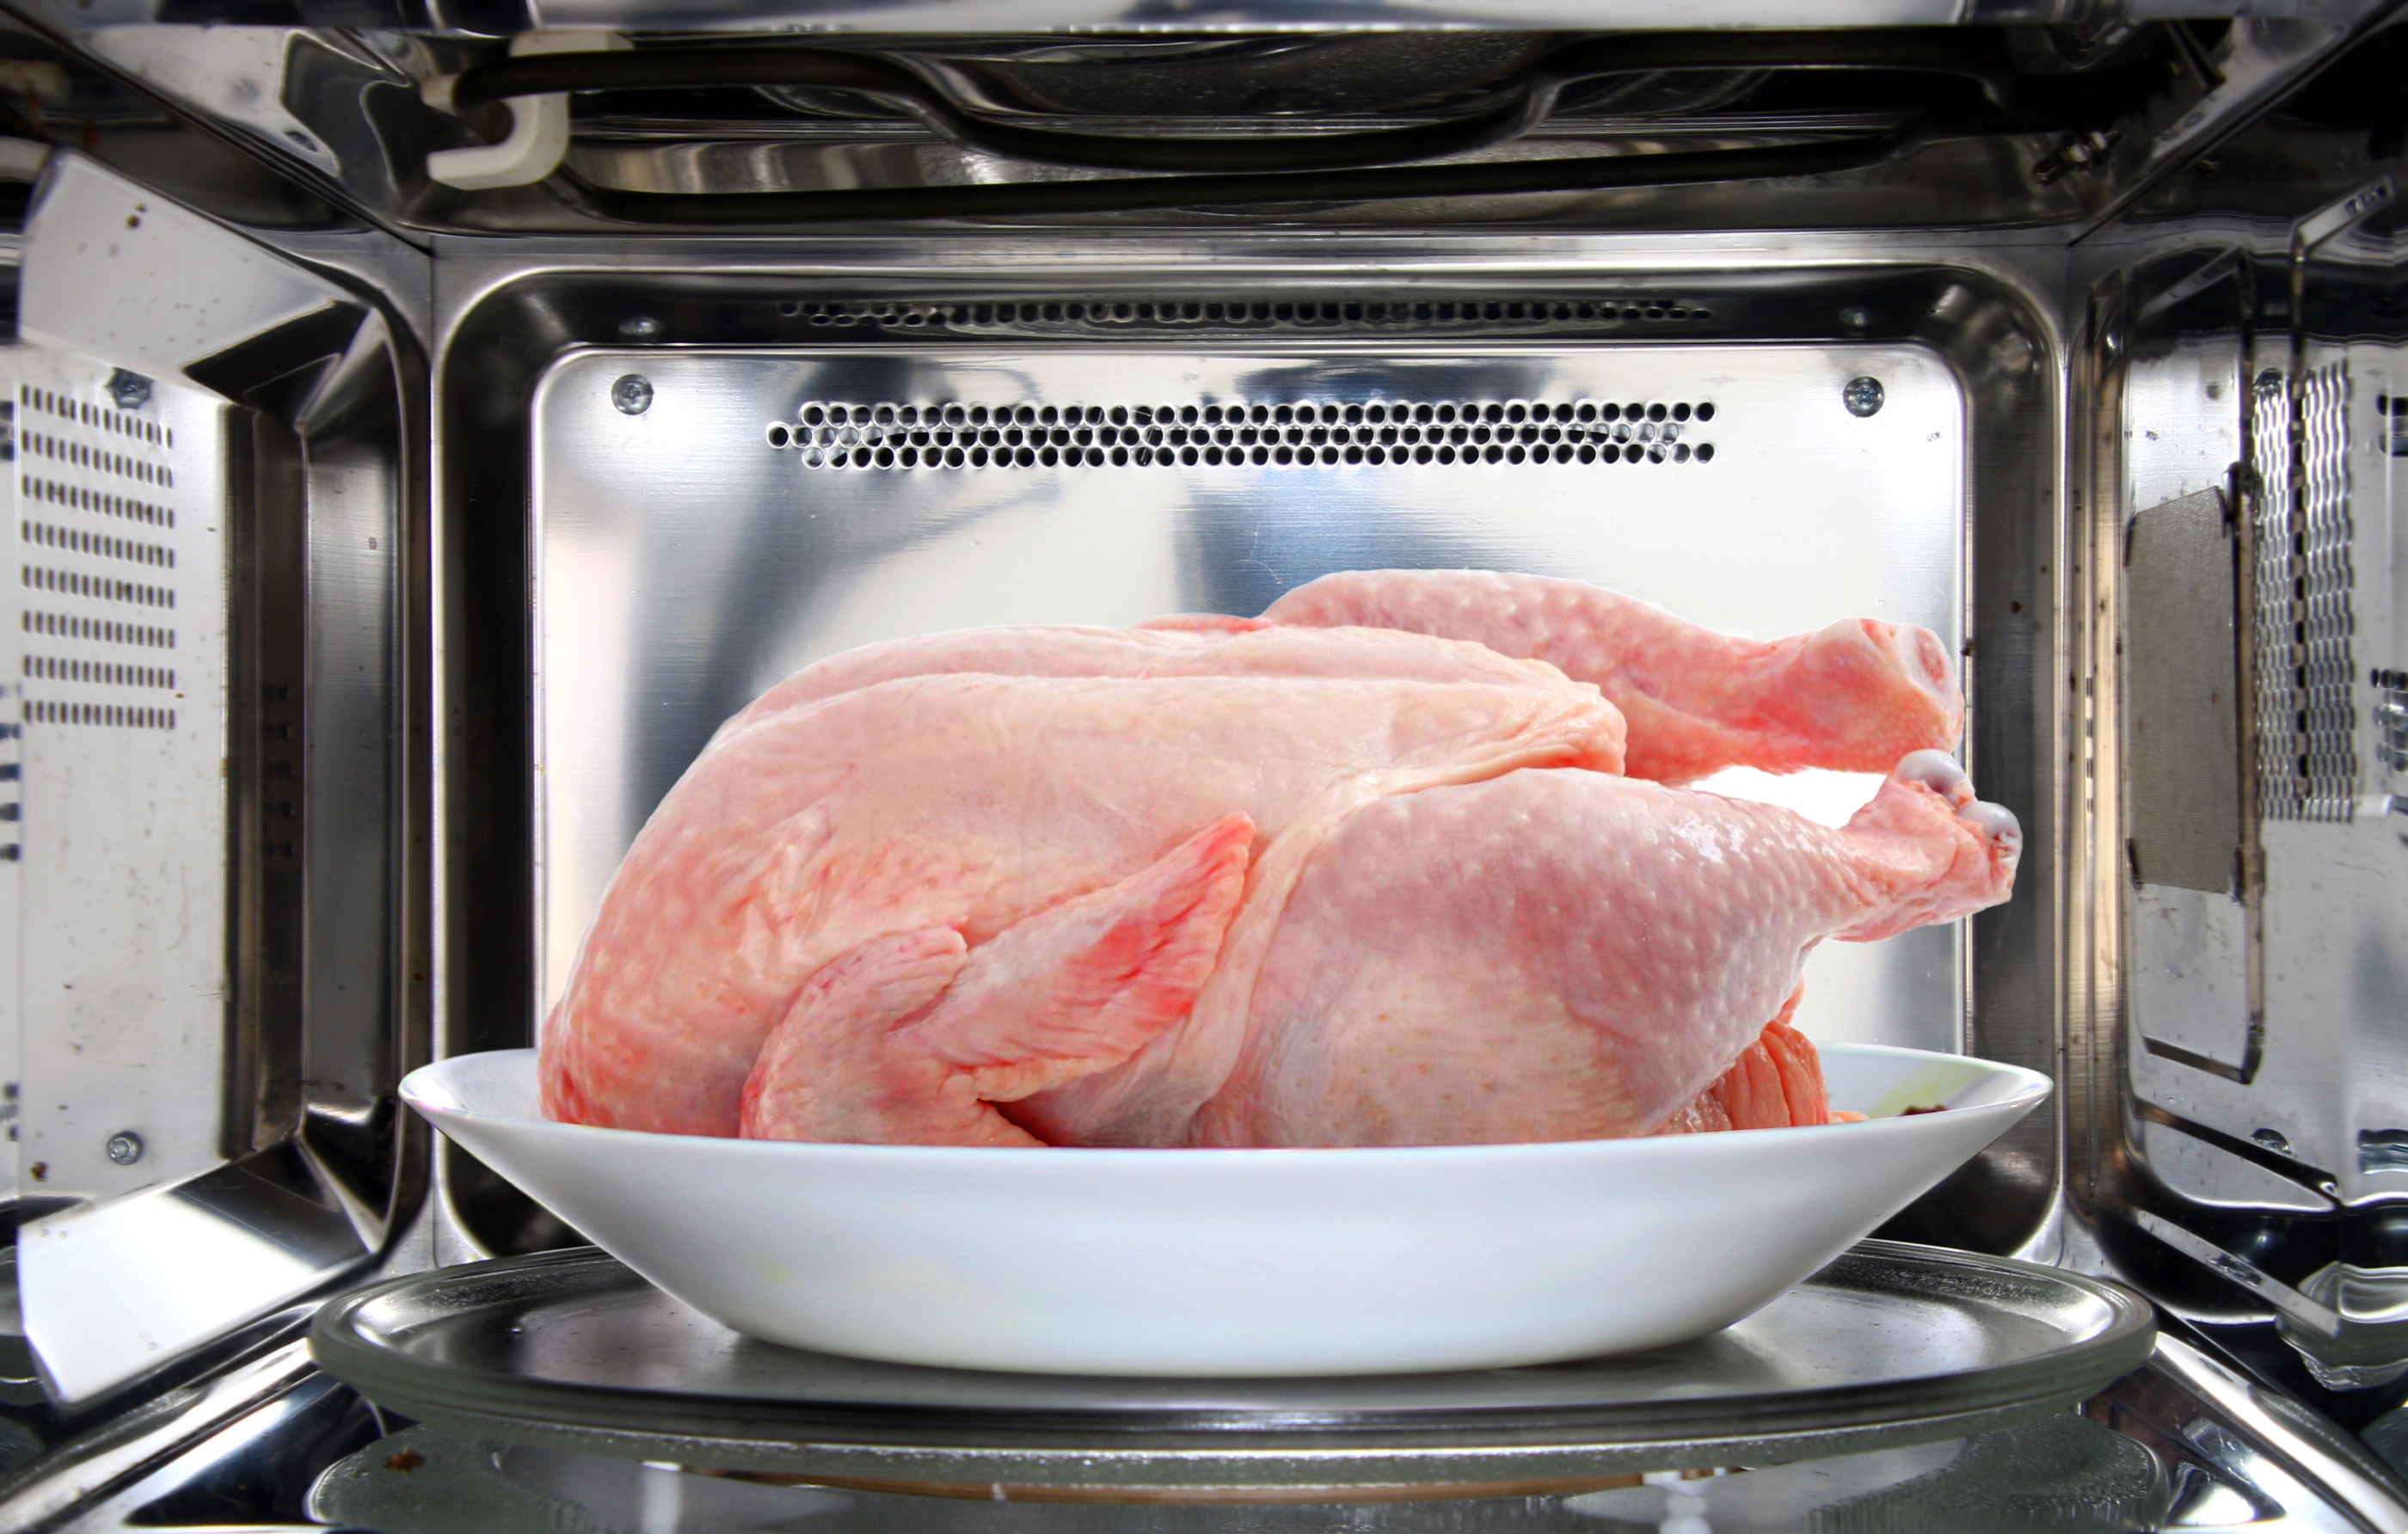 Whole chicken defrosting in the microwave